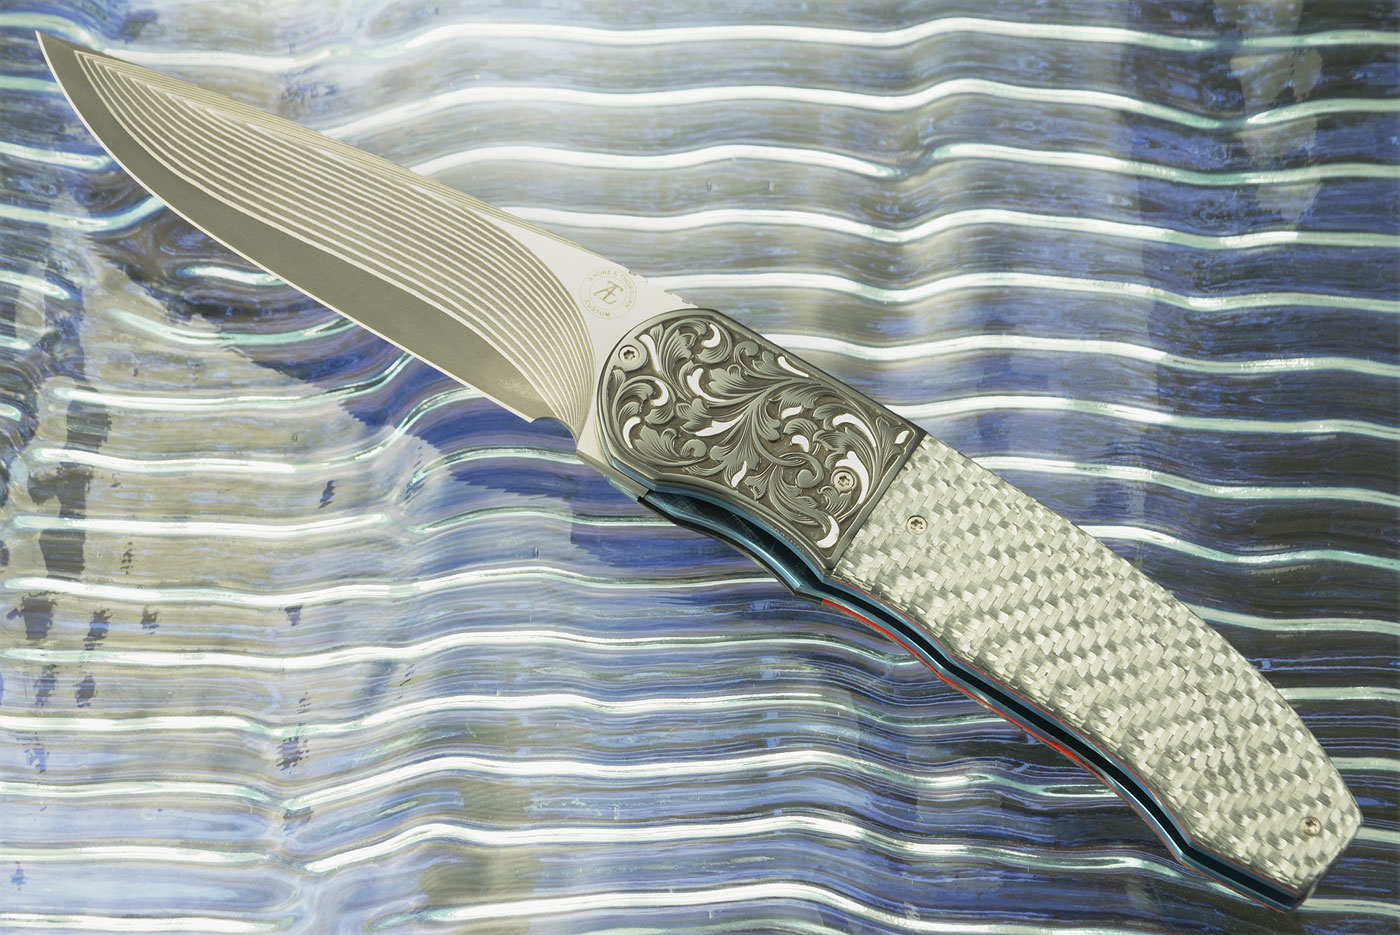 L48 Front Flipper with Silver Twill, Engraved Zirconium, and SG2 San Mai (Ceramic IKBS)